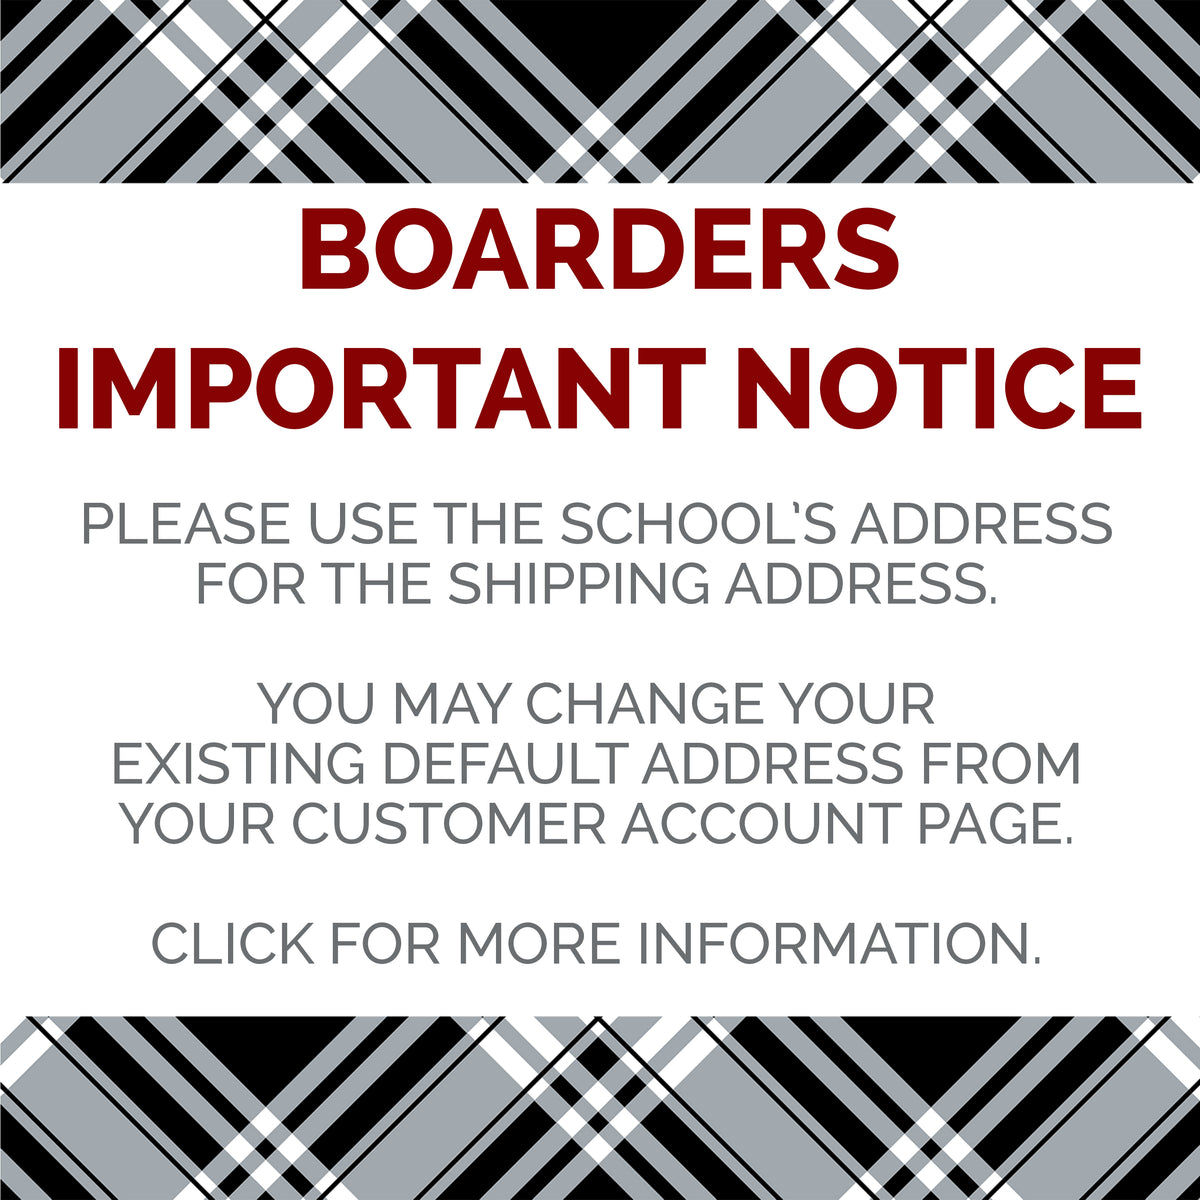 BOARDERS  |  IMPORTANT NOTICE